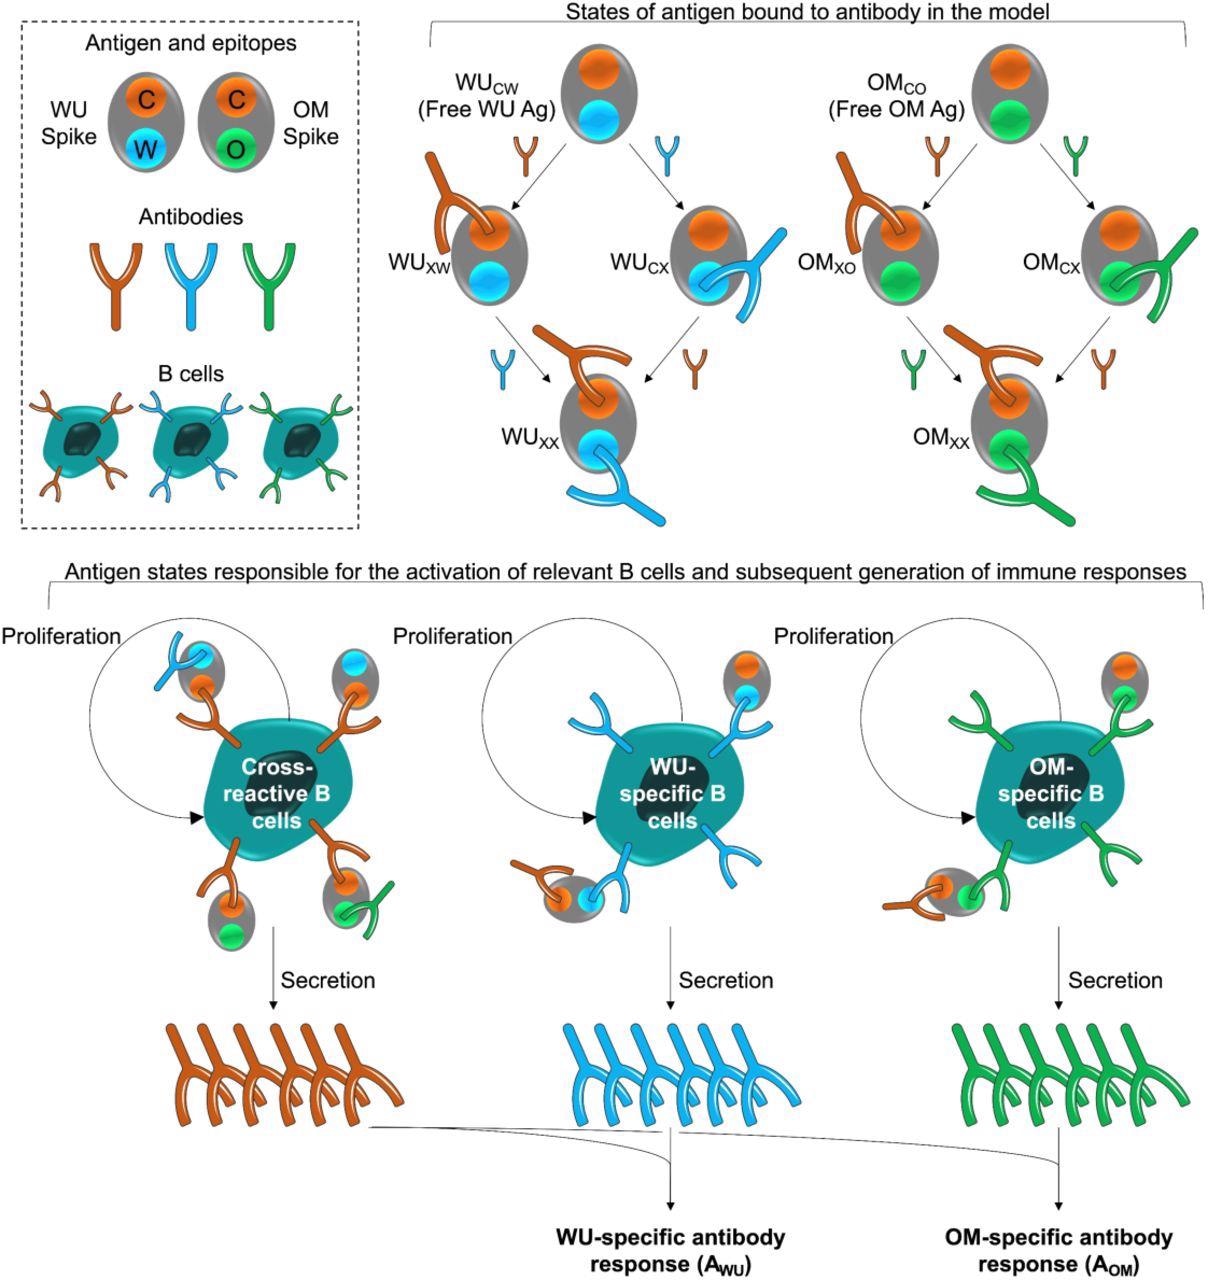 Model schematic. The box at the top left shows the epitopes of the WU- and OM-vaccines. Epitope C (shown in orange) is common to both vaccines. Epitopes W (blue) and V (green) are unique to the WU and OM respectively. Antibodies specific to these epitopes can bind to these epitopes and prevent them from stimulating B cells for the same epitope. The different antigen states generated and the B cells they stimulate are shown in the top right and bottom panels respectively. The bottom panel illustrates that binding of antigen to B cells stimulates their clonal expansion and the production of antibodies.